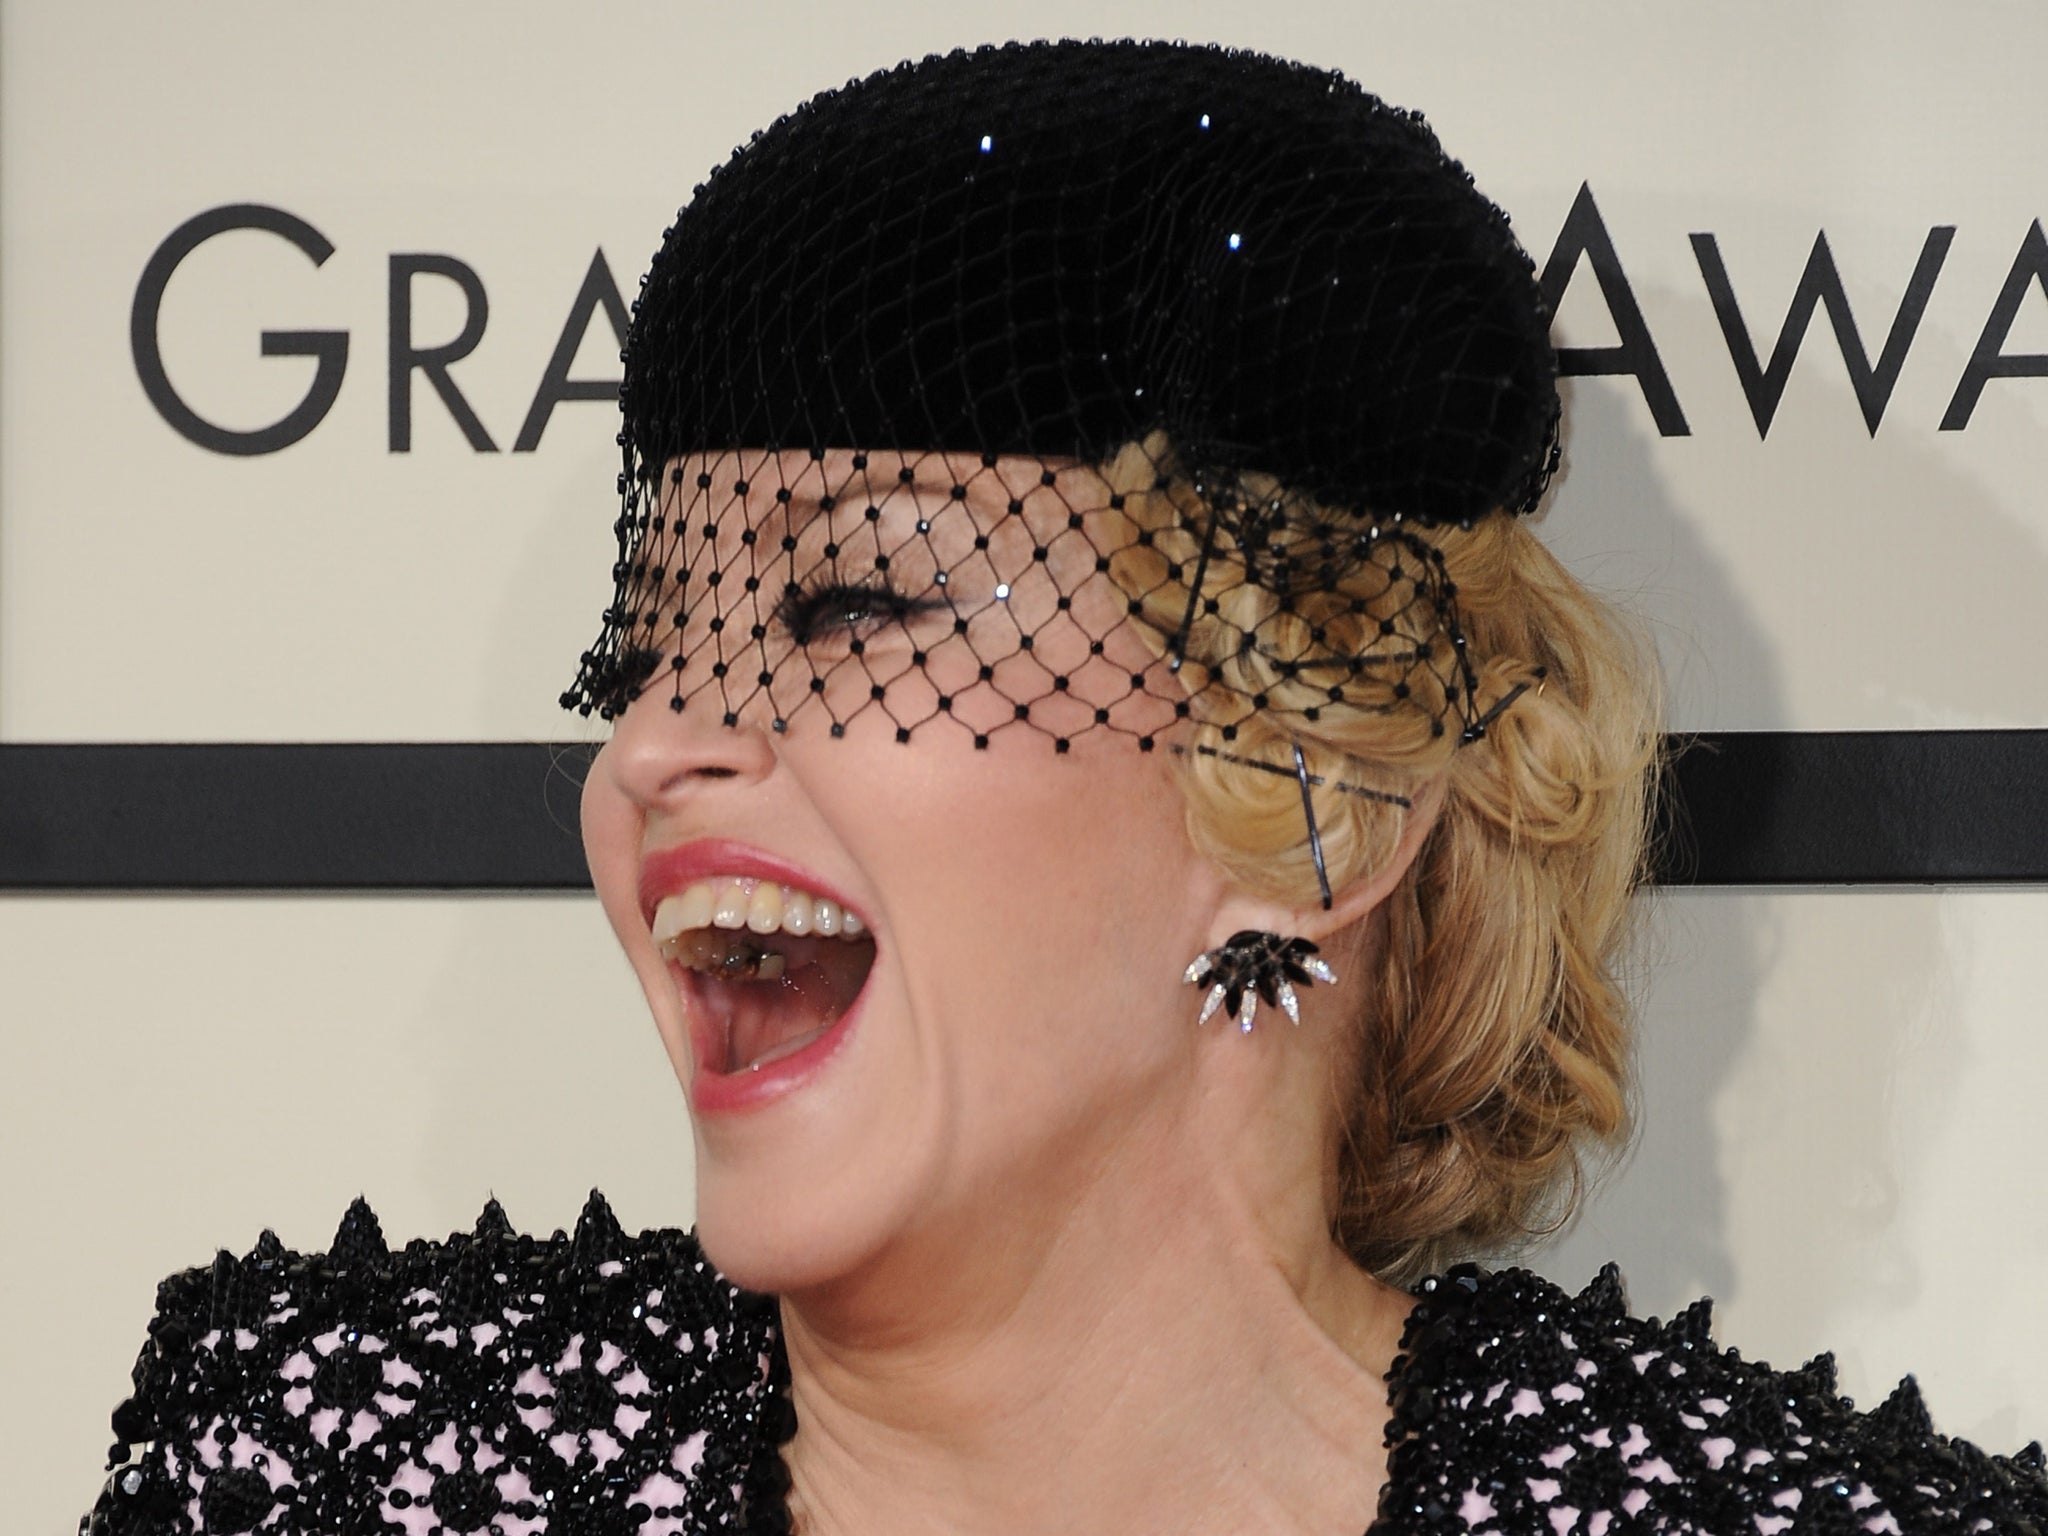 Whatever the reaction, Madge will always have the last laugh.